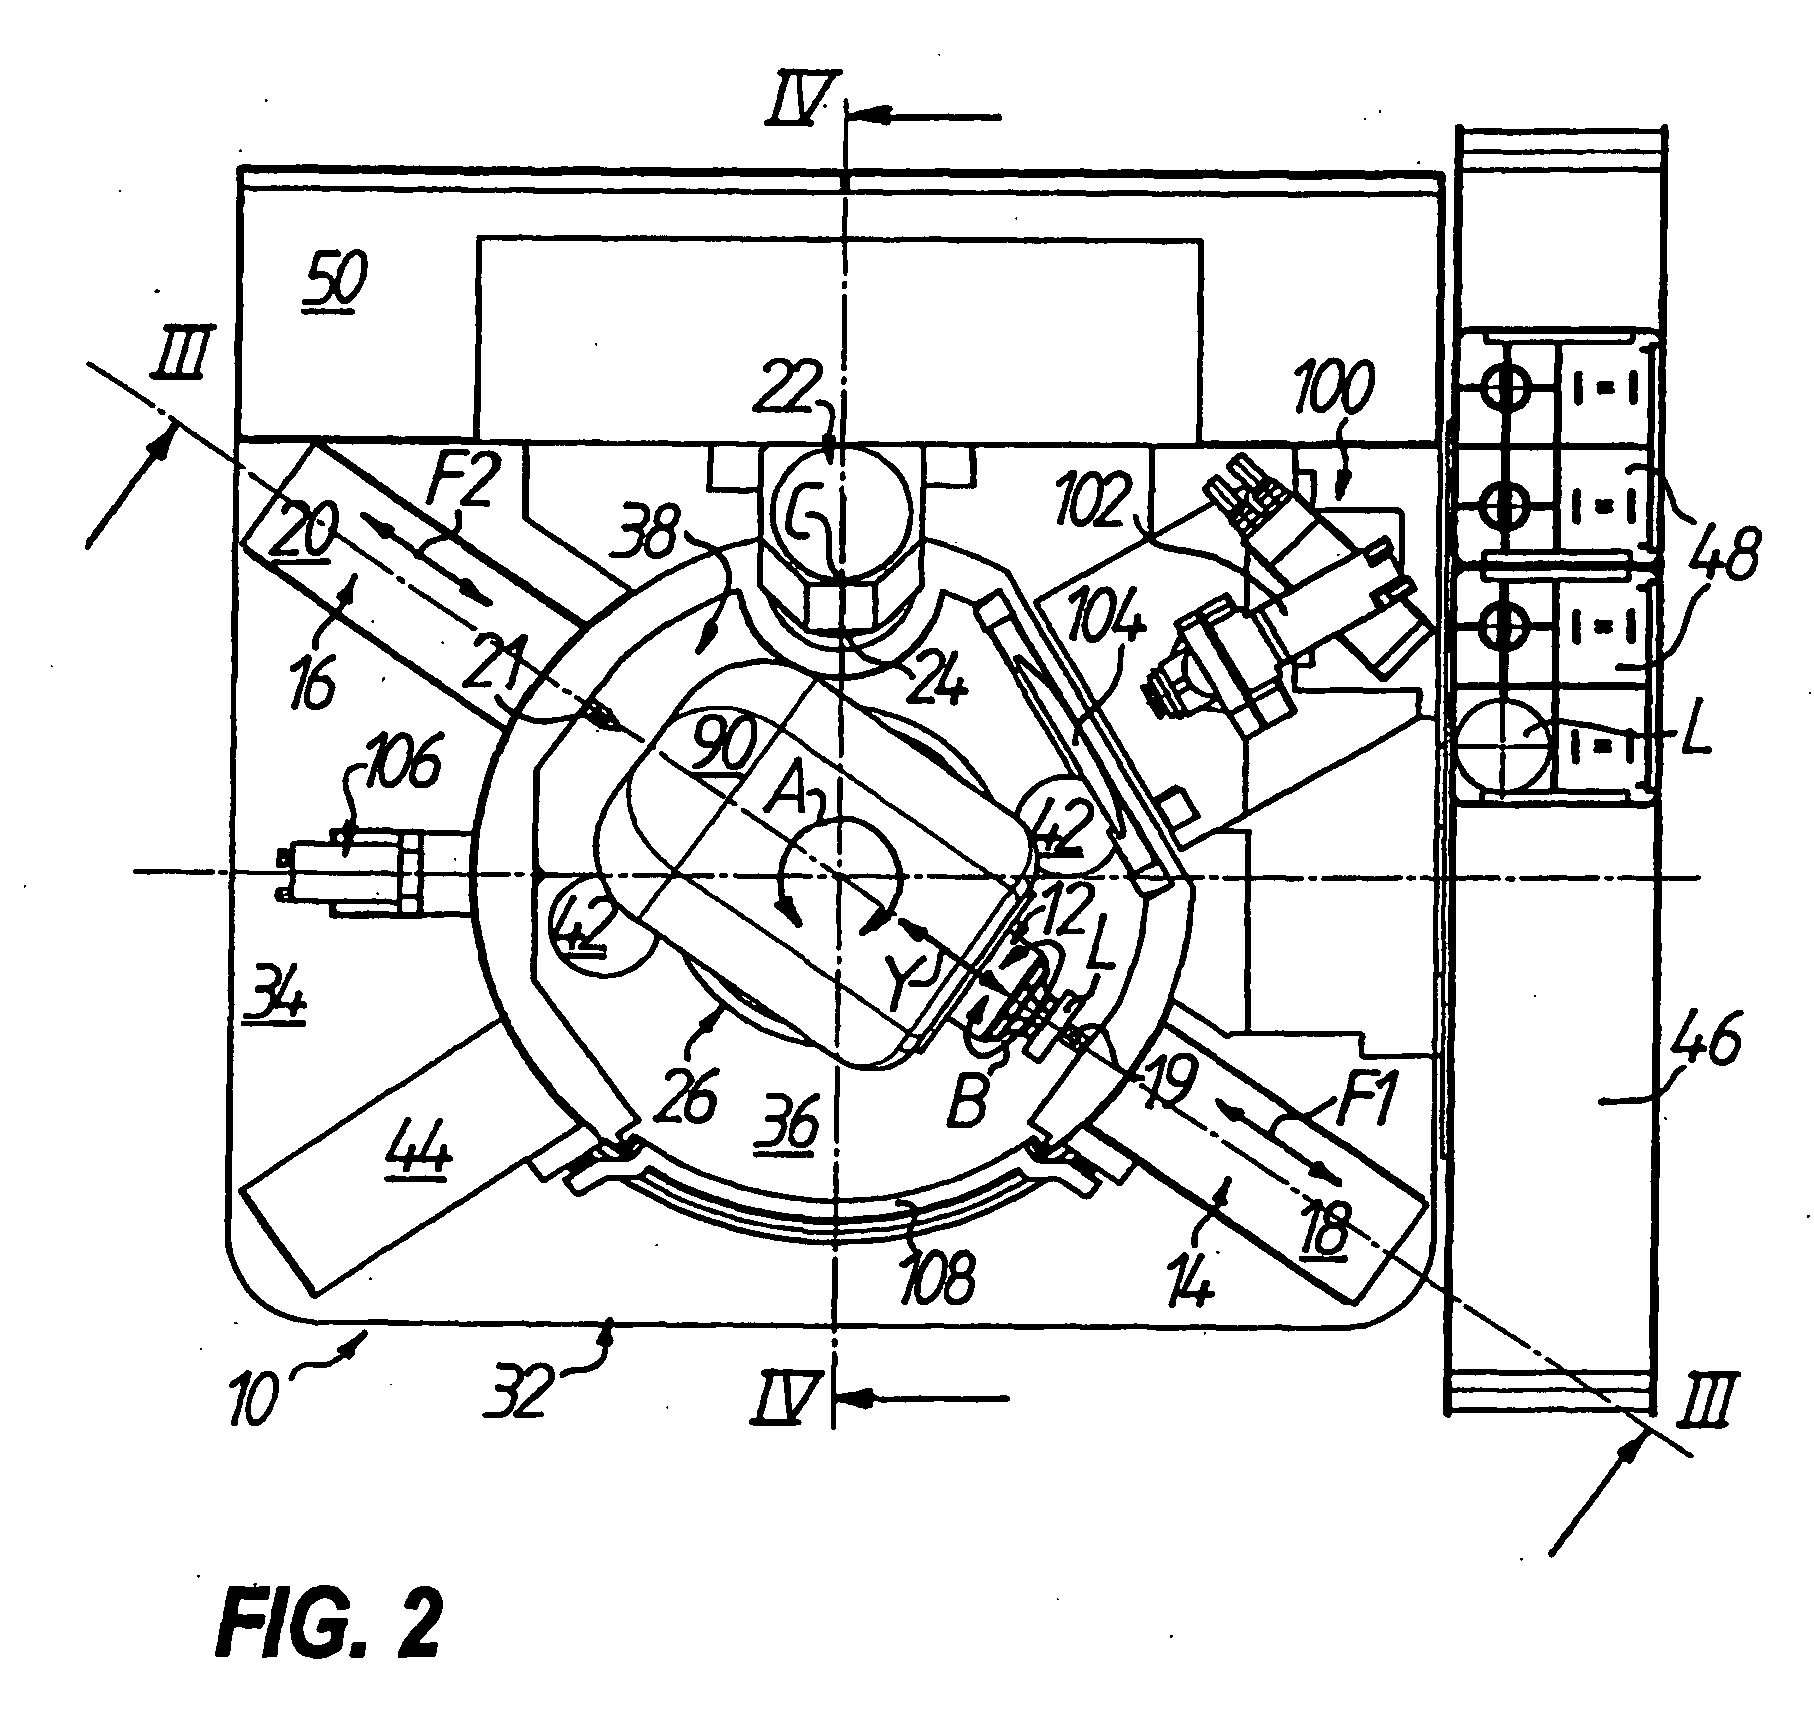 Machine for the processing of optical work pieces, specifically of plastic spectacle lenses